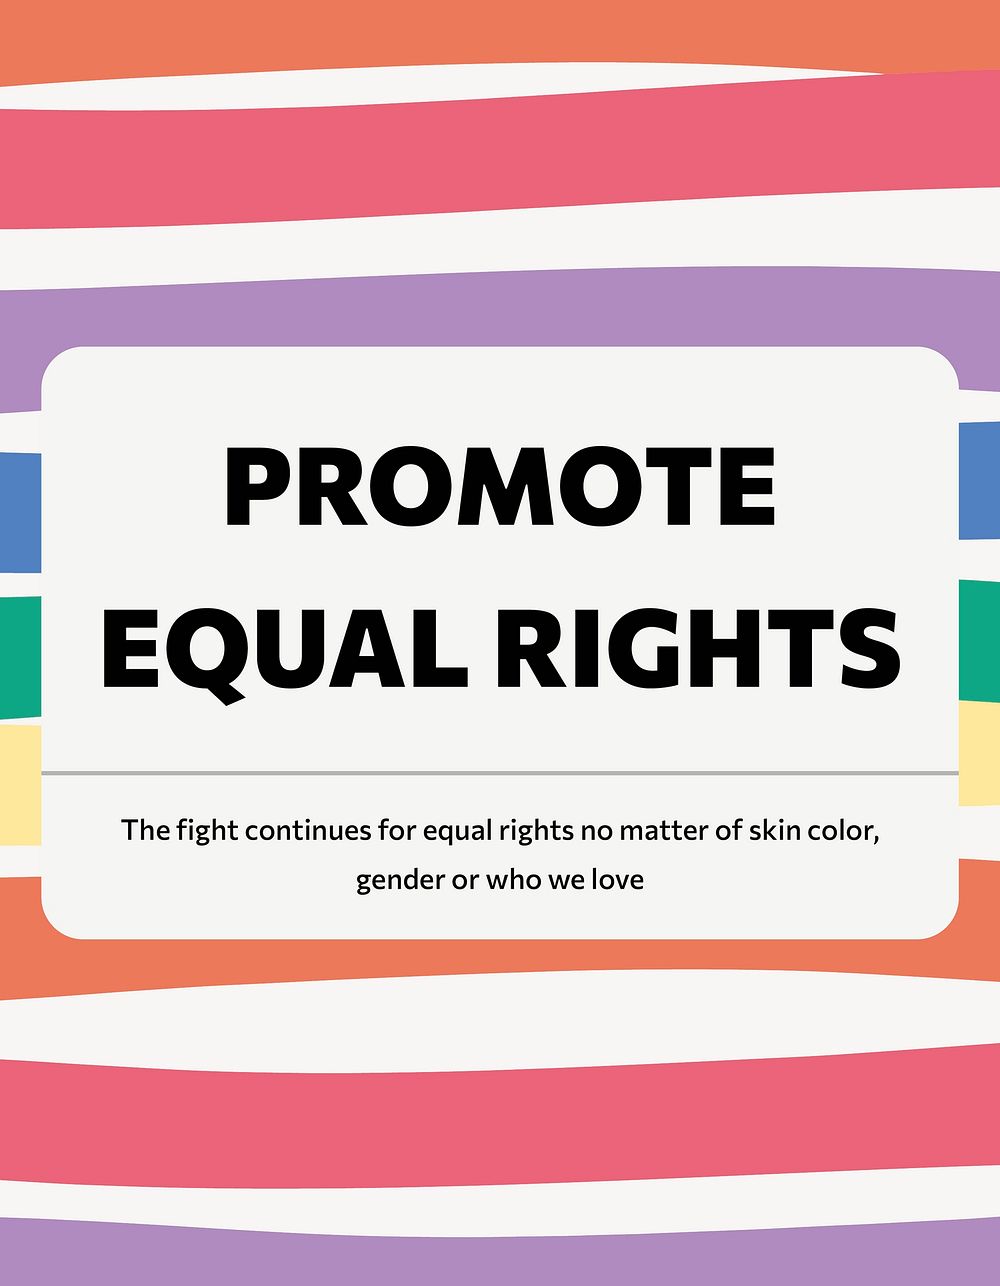 Promote equal rights flyer template, Pride Month celebration vector